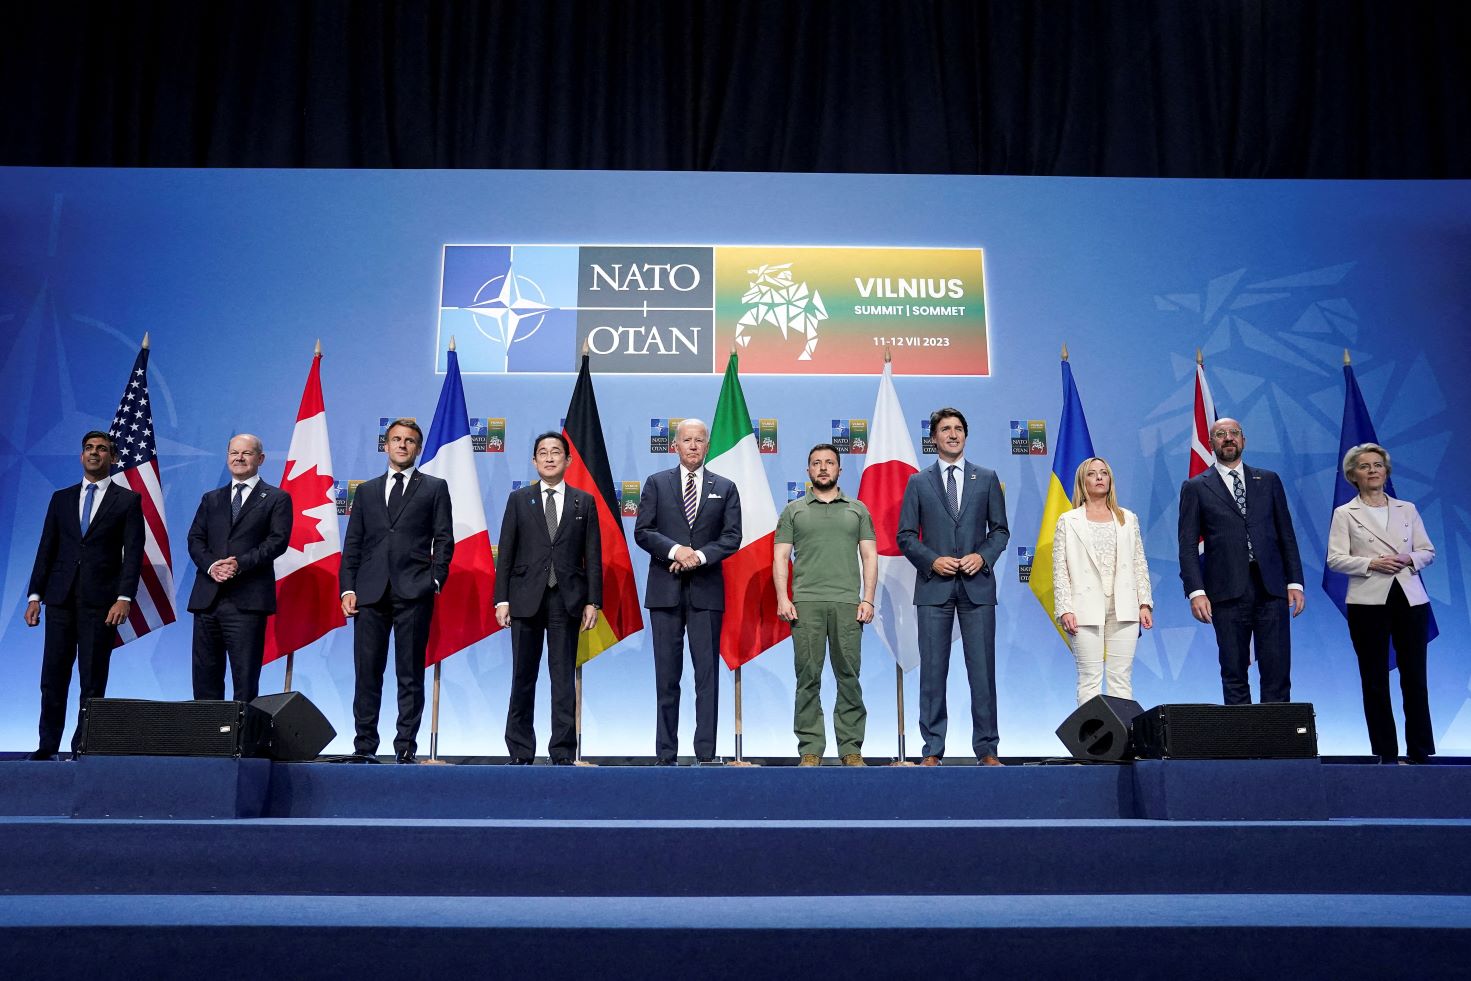 NATO leaders and invited guests pose for a family photo, as they attend an event with G7 leaders to announce a joint declaration of support for Ukraine, as the NATO summit is held in Vilnius, Lithuania on July 12, 2023. (Kevin Lamarque/Reuters)